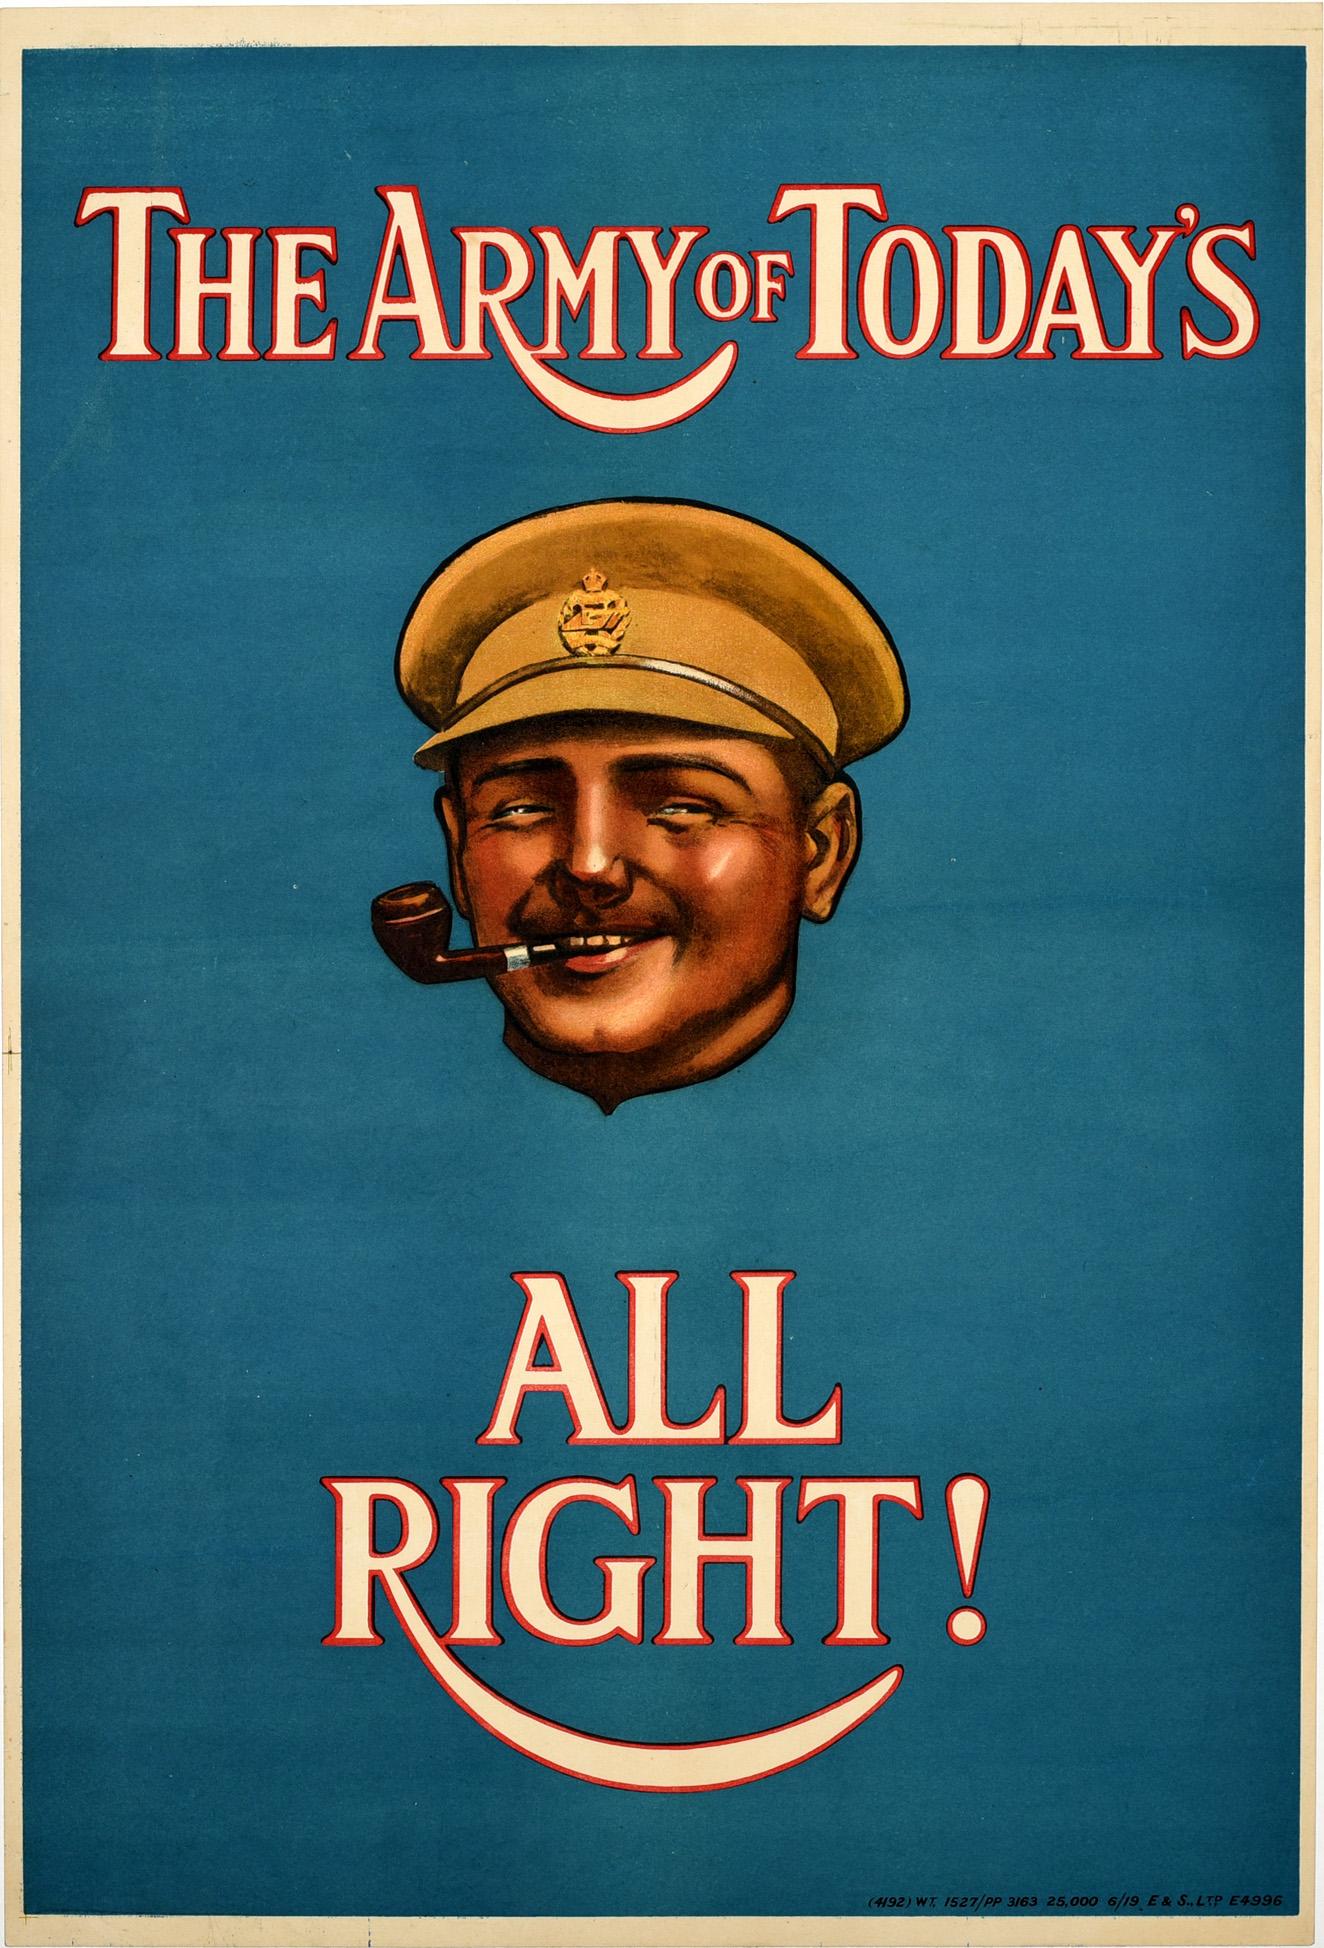 Unknown Print - Original Antique Poster The Army Of Today's All Right British Army Recruitment